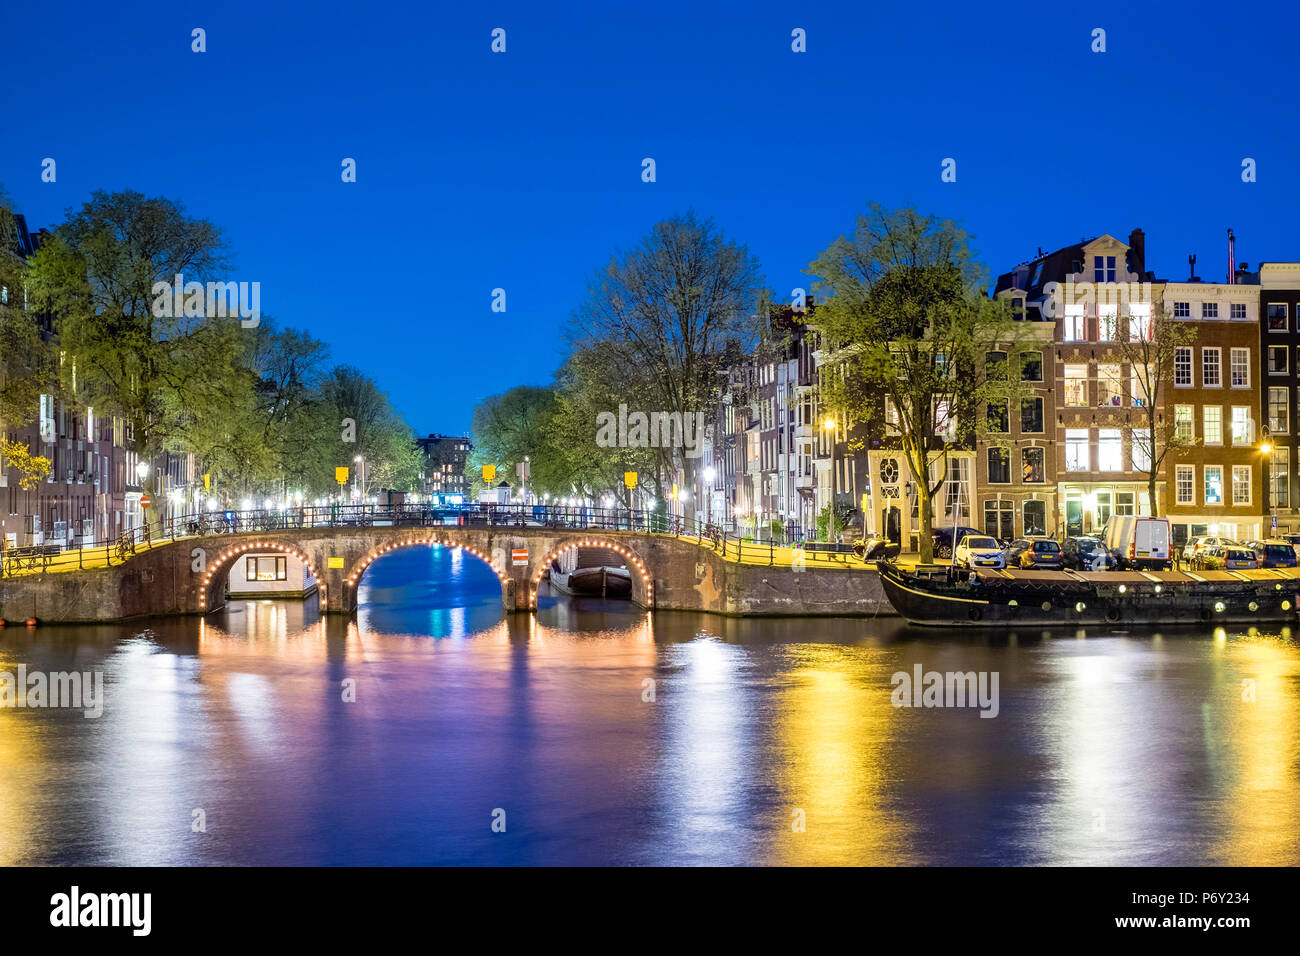 Netherlands, North Holland, Amsterdam. Canal houses along the Amstel River at night. Stock Photo